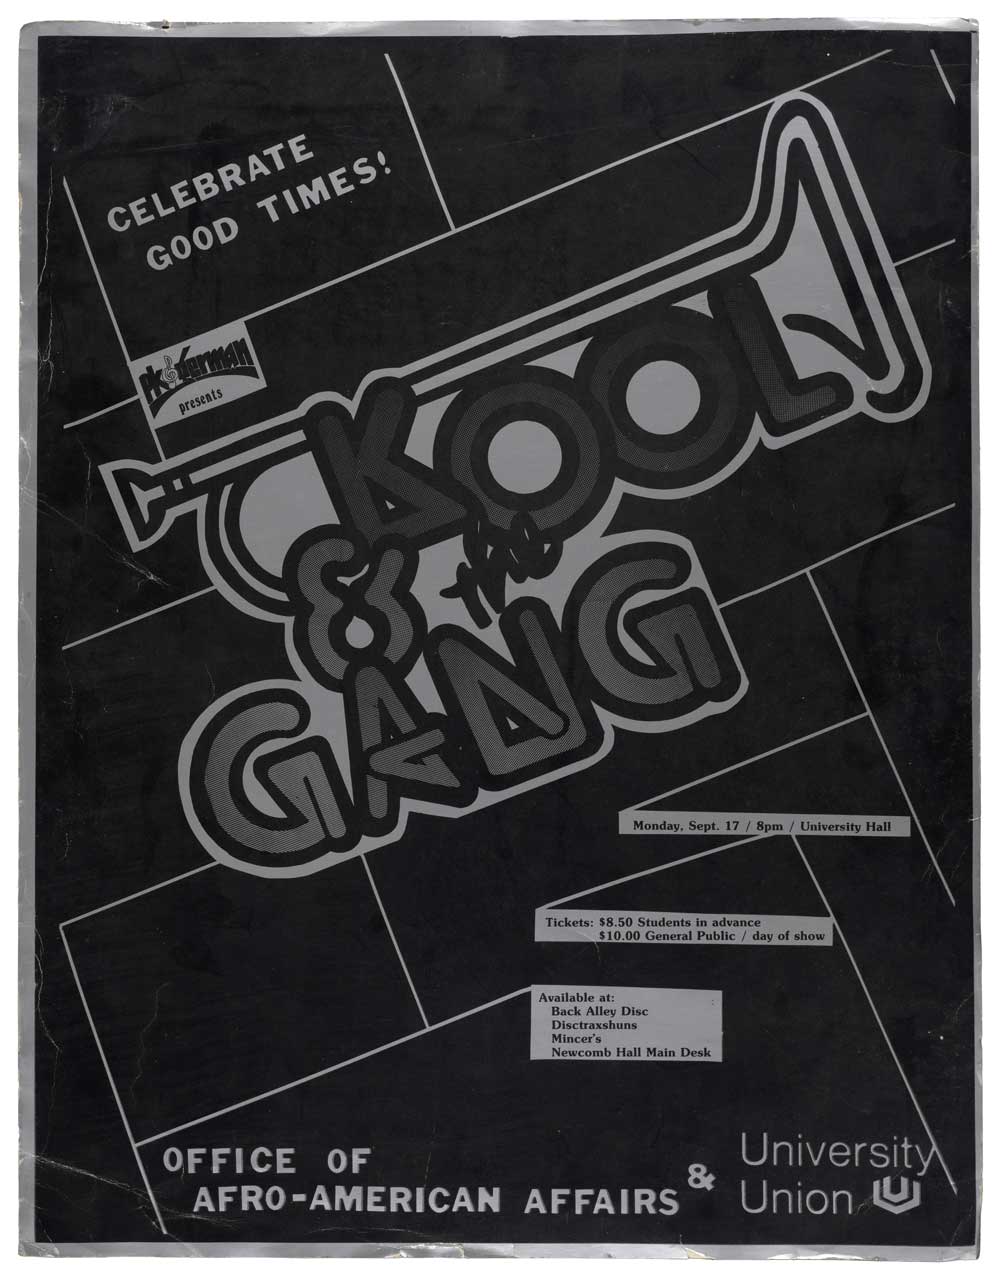 Homemade concert poster from when Kool & the Gang visited UVA in the 1980s